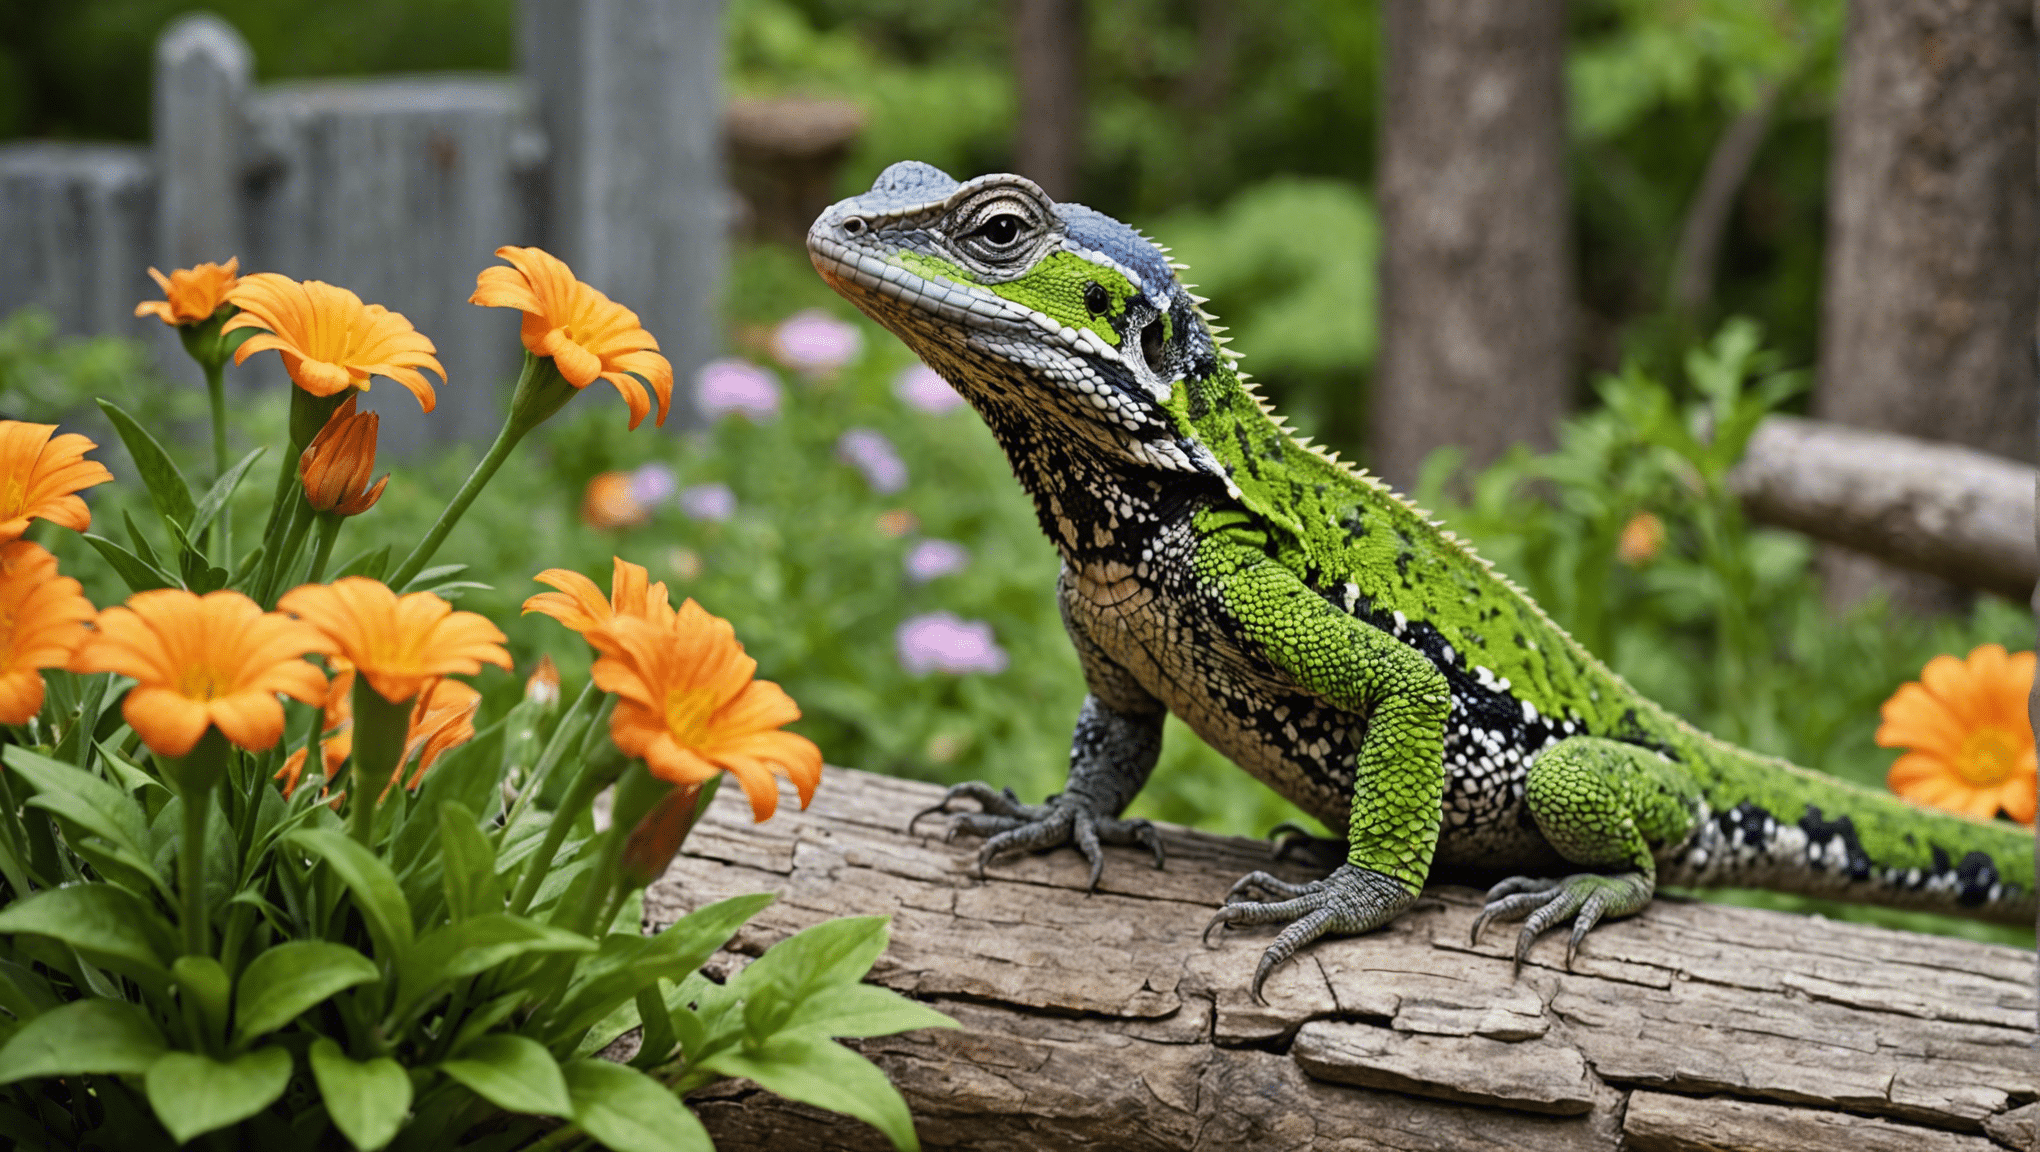 learn how to properly care for western fence lizards with these helpful tips and guidance. find out what they need to thrive and stay healthy in their environment.